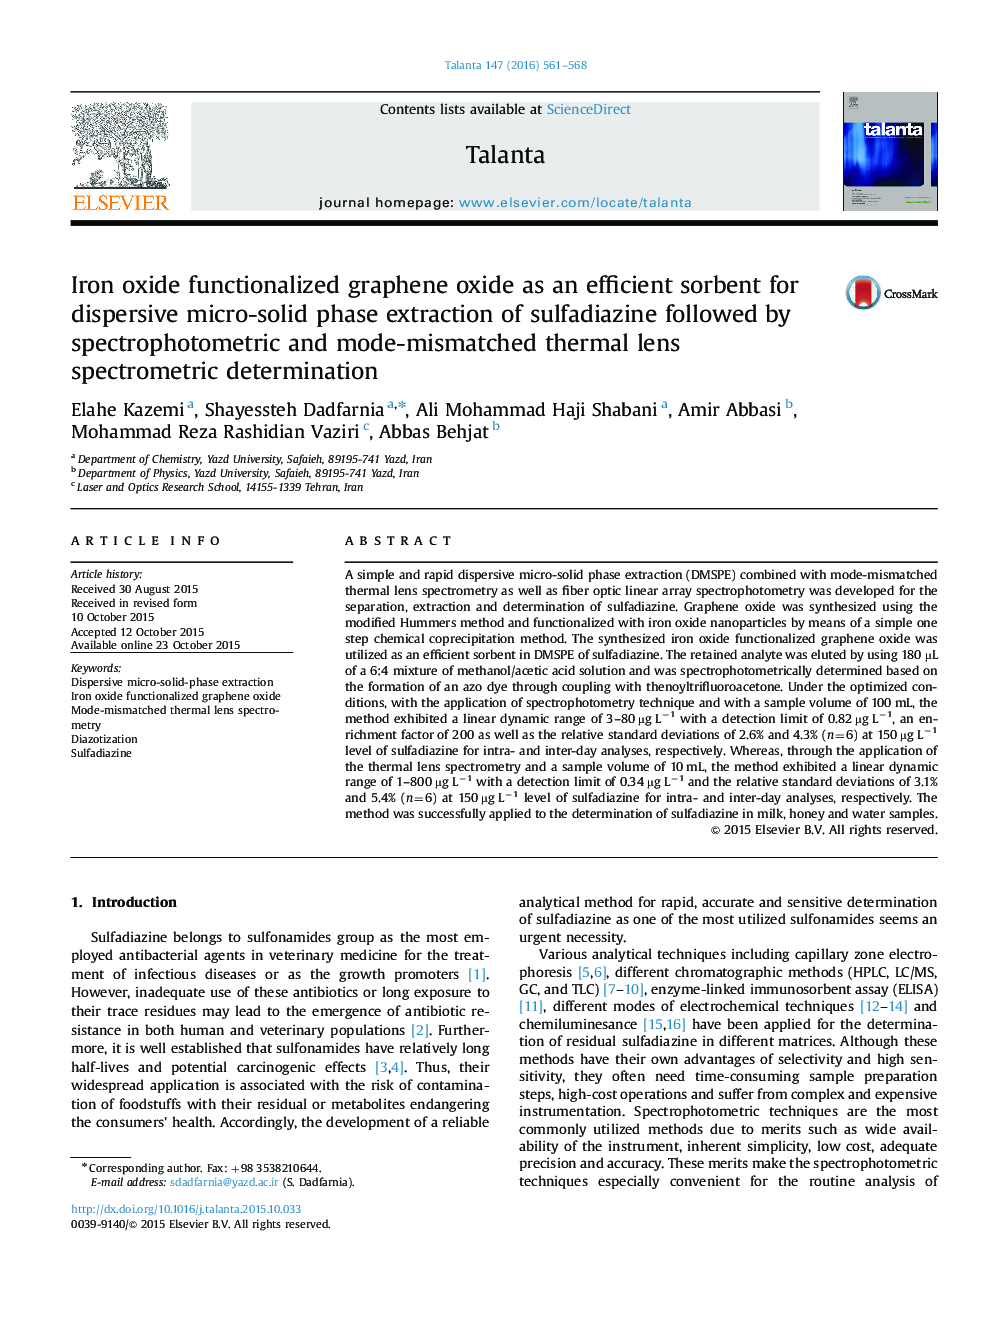 Iron oxide functionalized graphene oxide as an efficient sorbent for dispersive micro-solid phase extraction of sulfadiazine followed by spectrophotometric and mode-mismatched thermal lens spectrometric determination